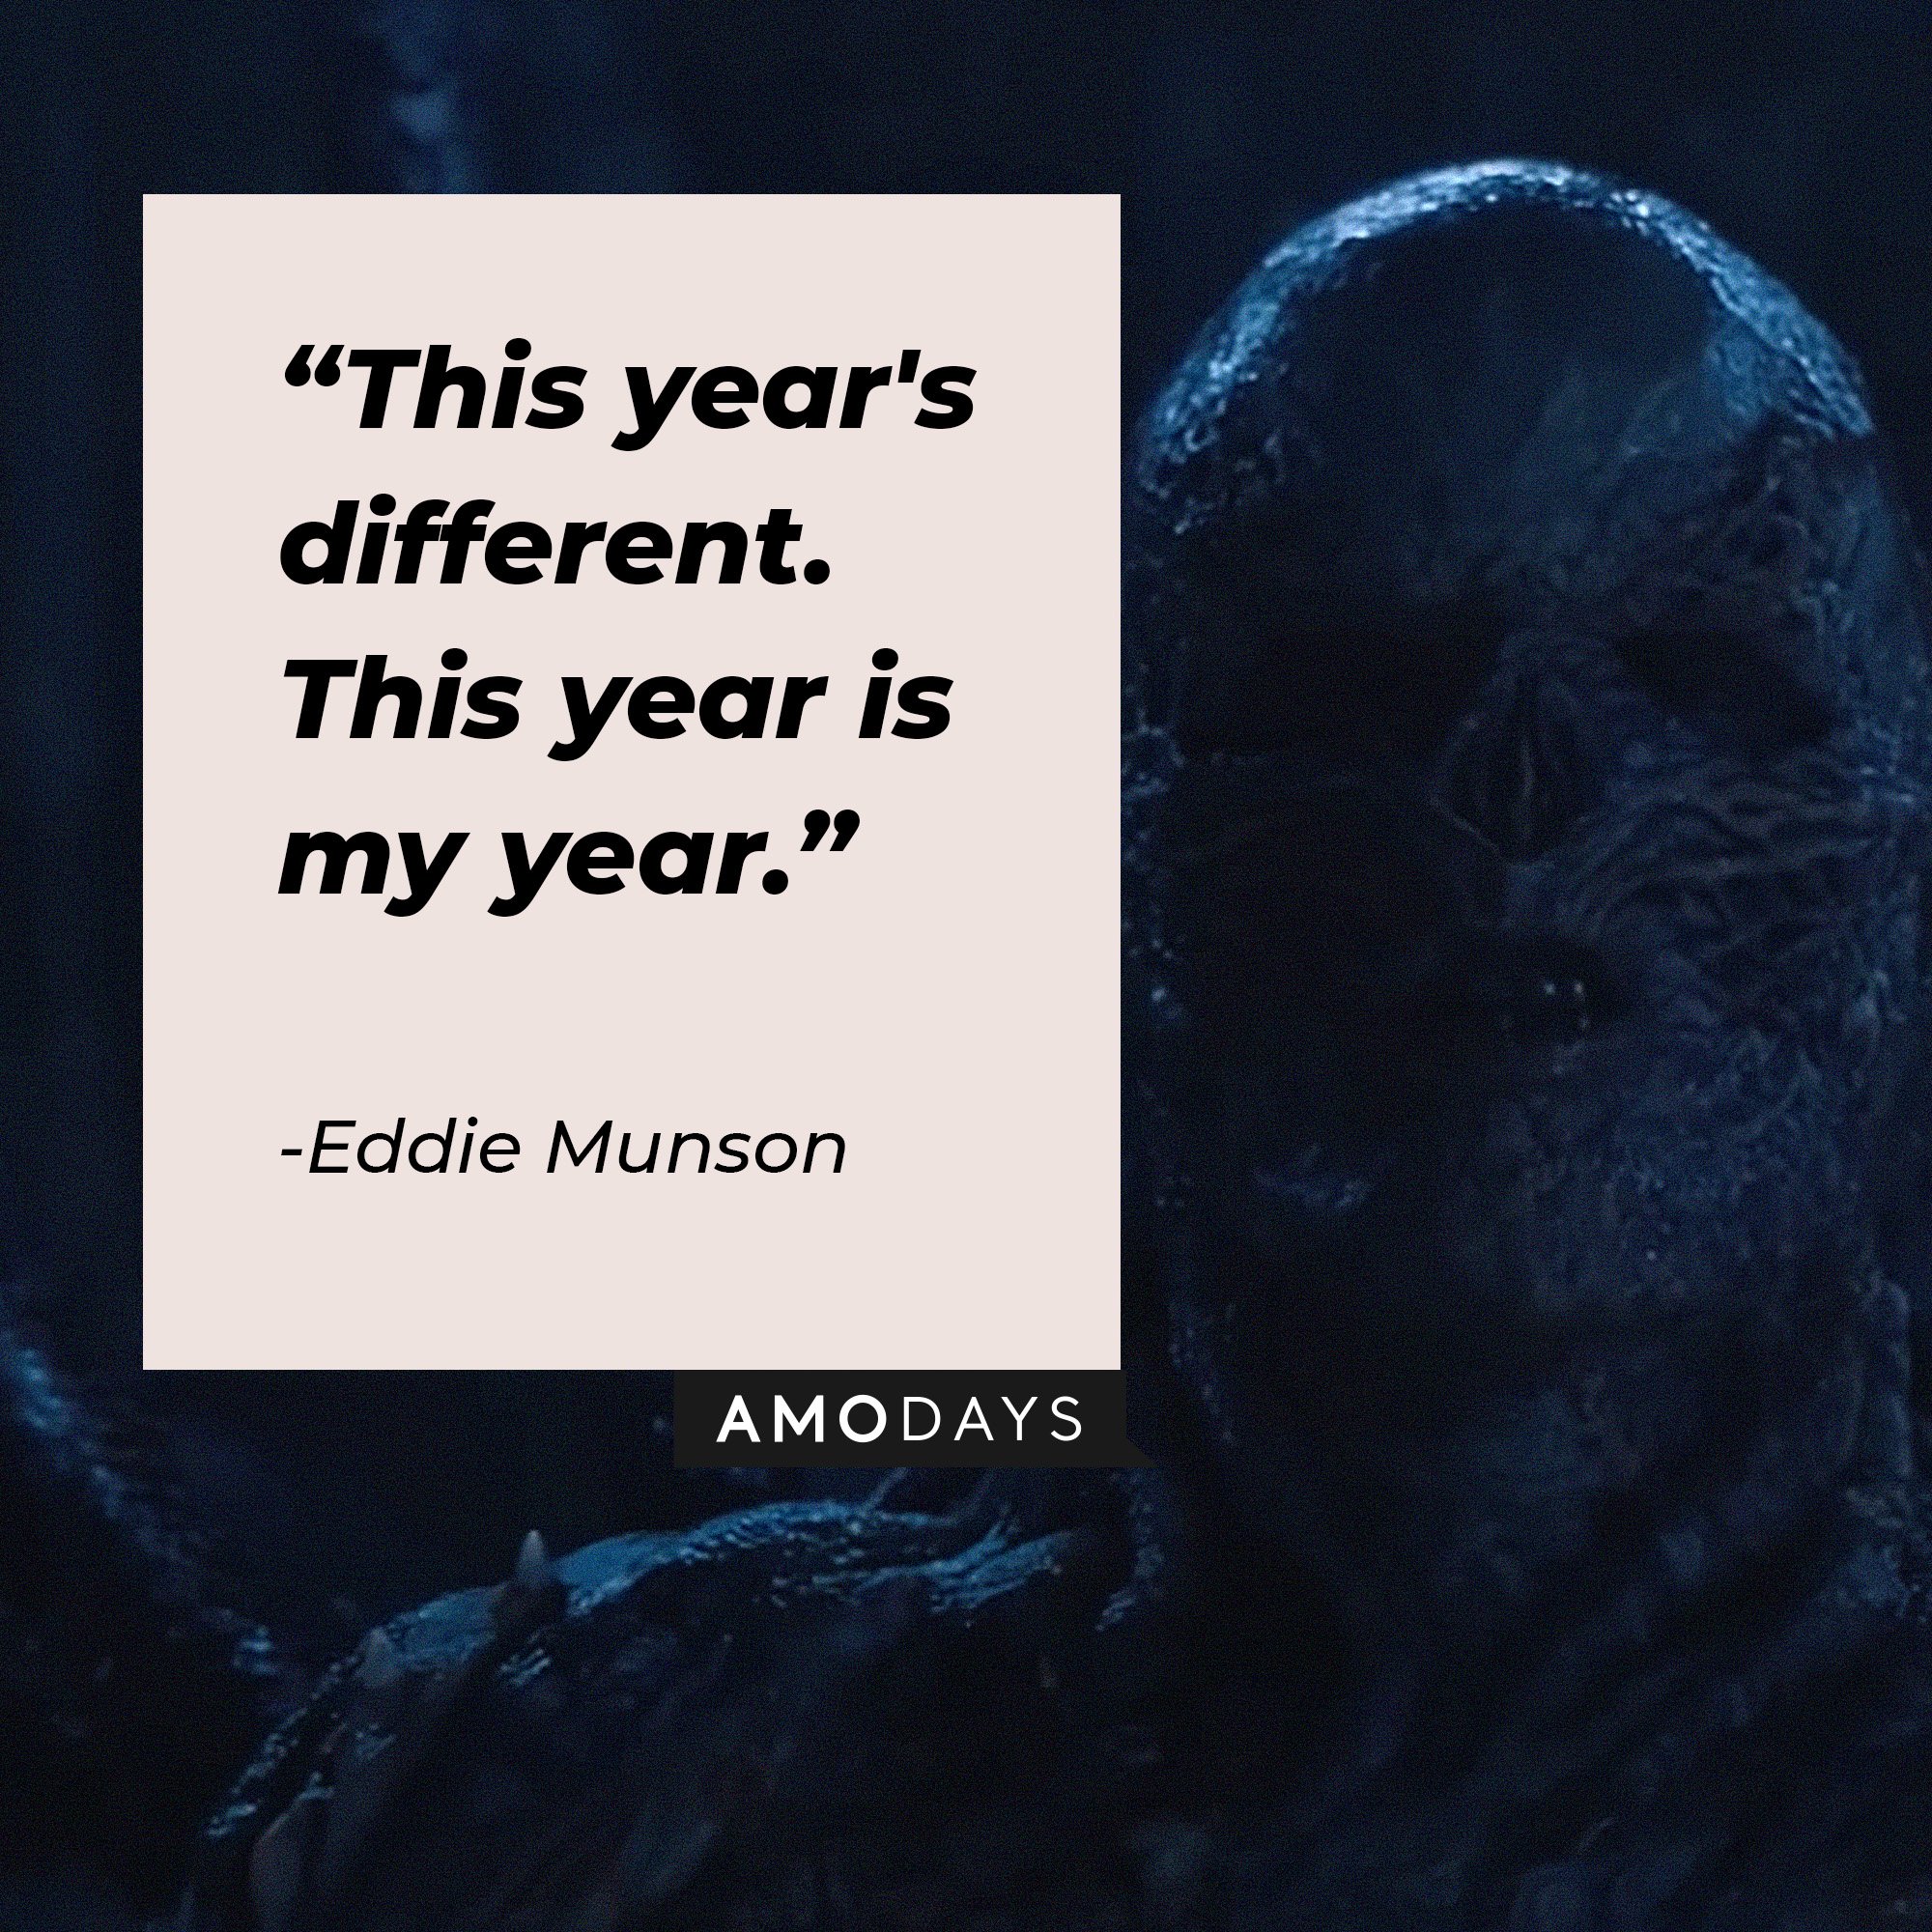 Eddie Munson’s quote: “This year's different. This year is my year.”  | Image: AmoDays